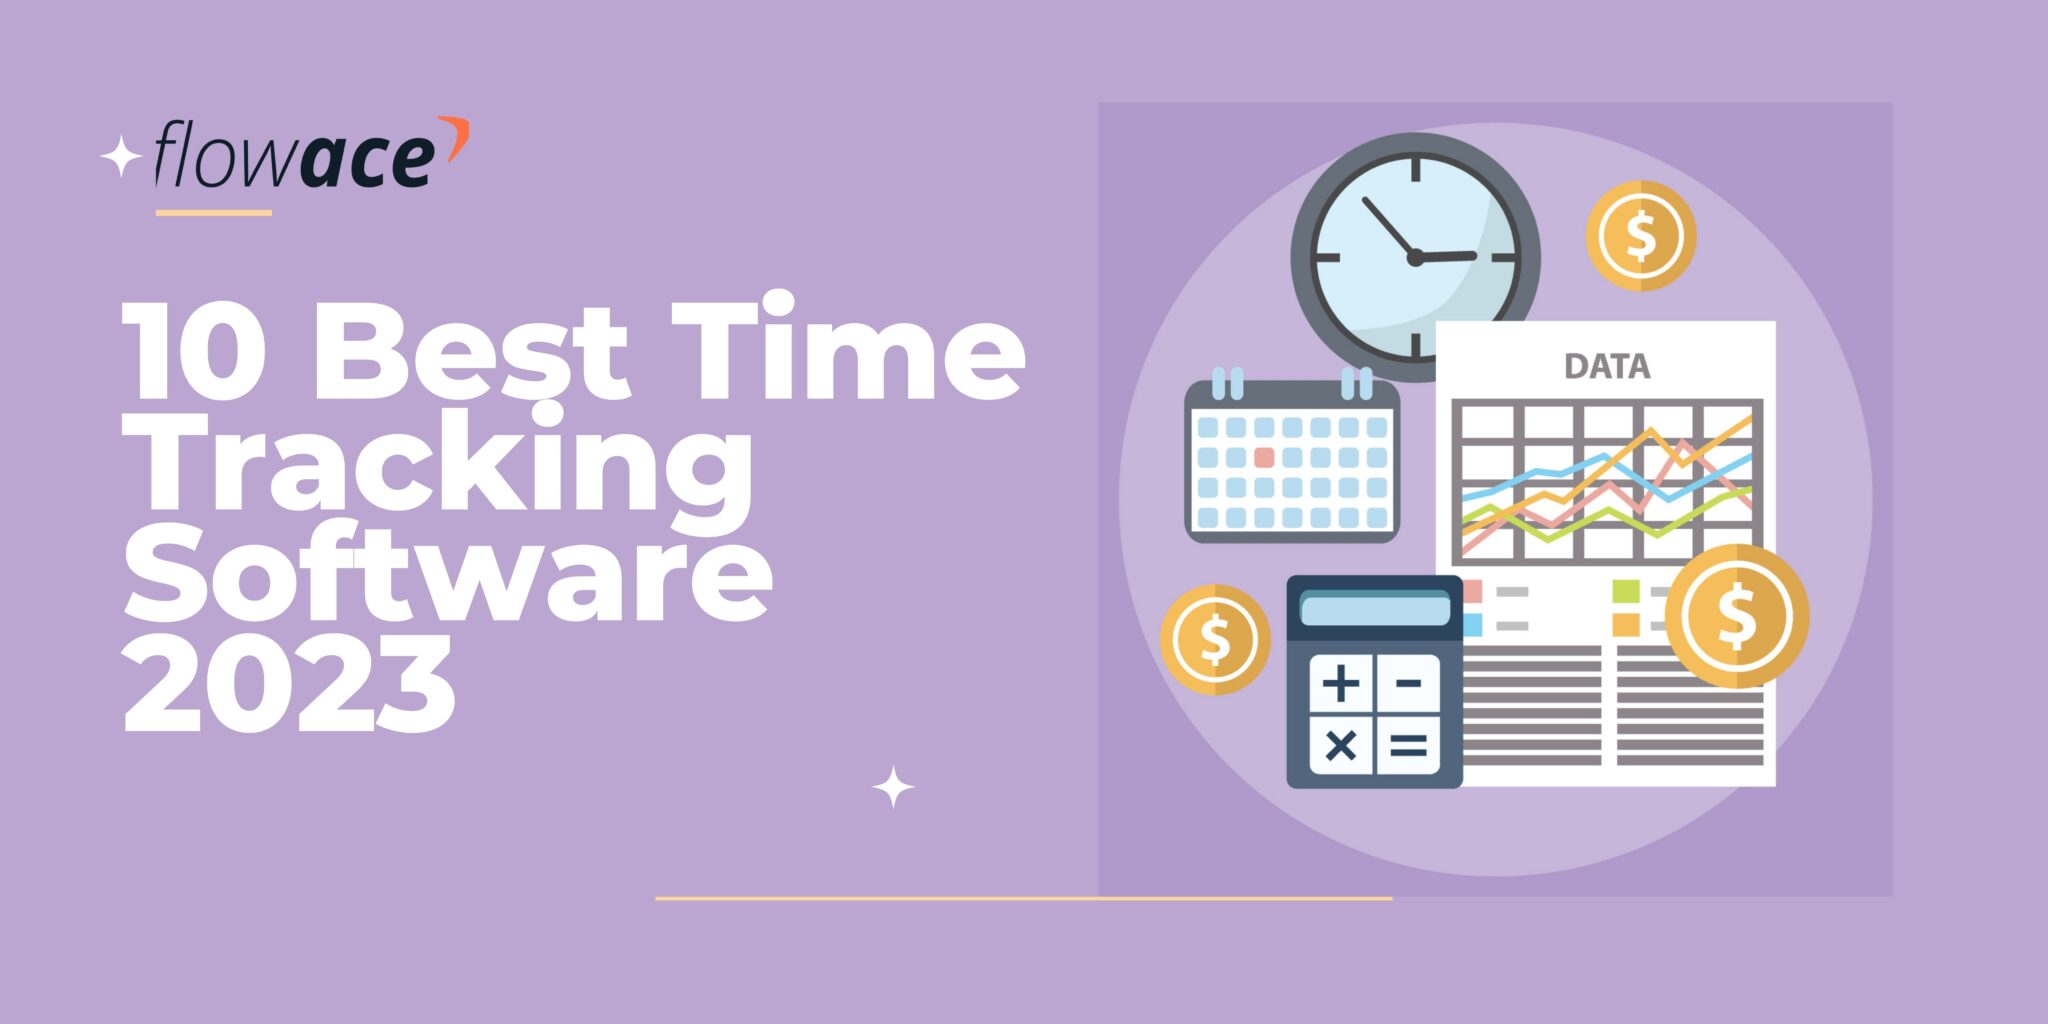 10 Best Time Tracking Software 2023